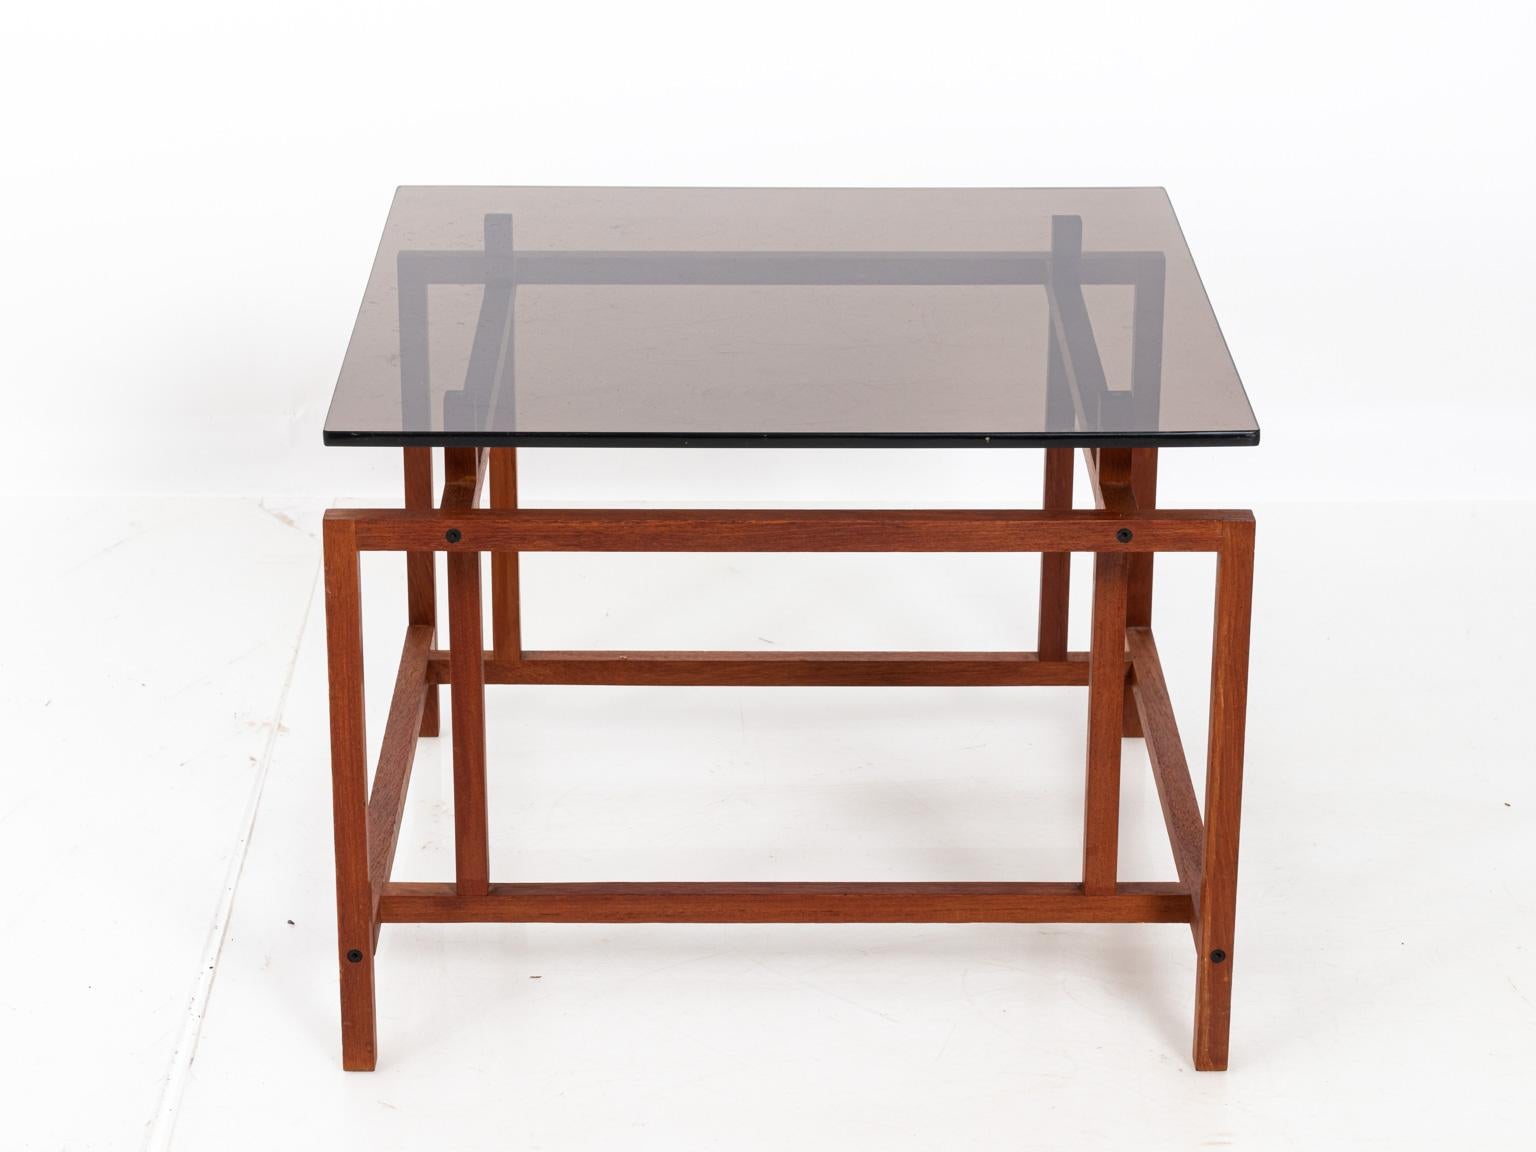 Pair of Henning Norgaard smoked Lucite Rosewood end tables by Komort Mobler. Made in Denmark. Please note of wear consistent with age.